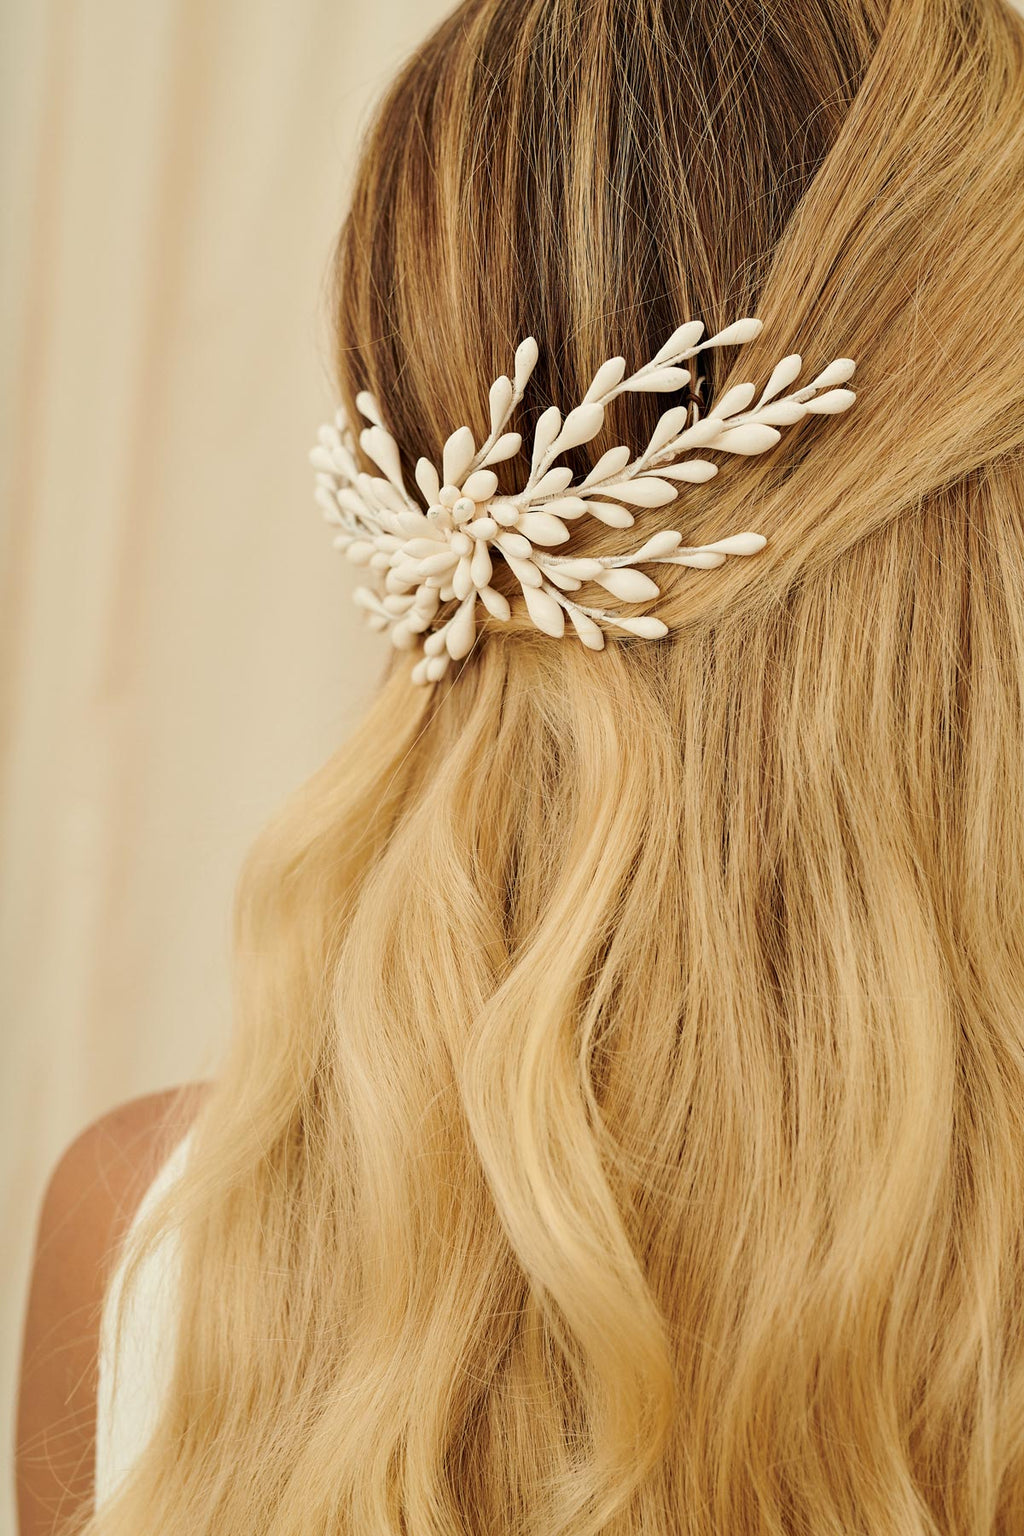 A delicate bridal hair accessory made from wax orange blossoms set into a comb